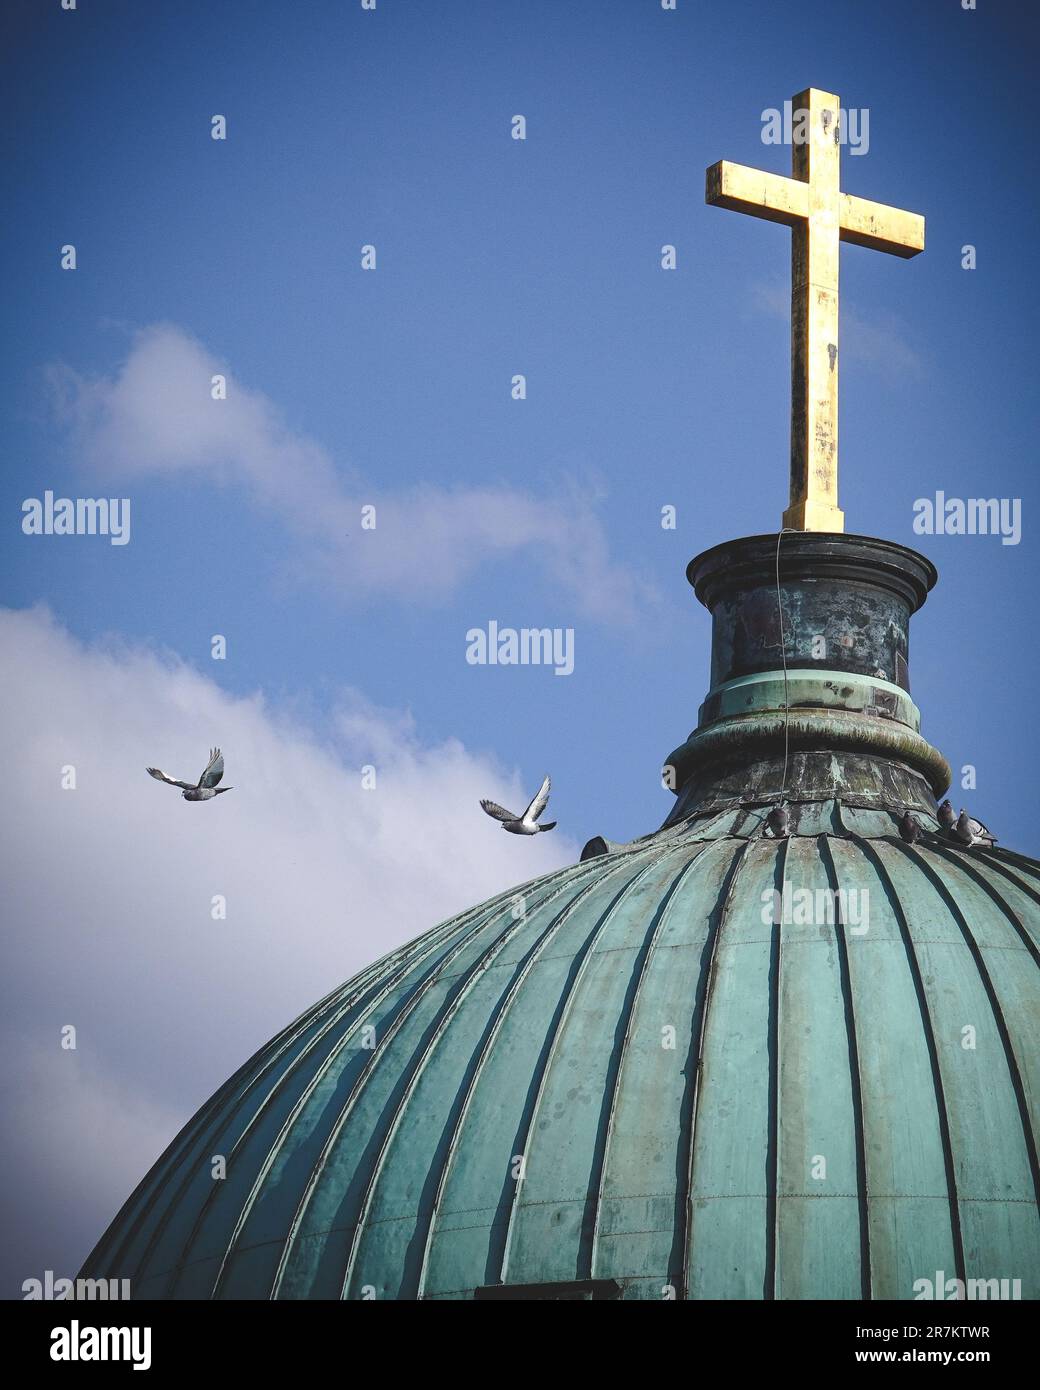 A single aircraft flying in the sky above a domed structure with a cross on its peak Stock Photo